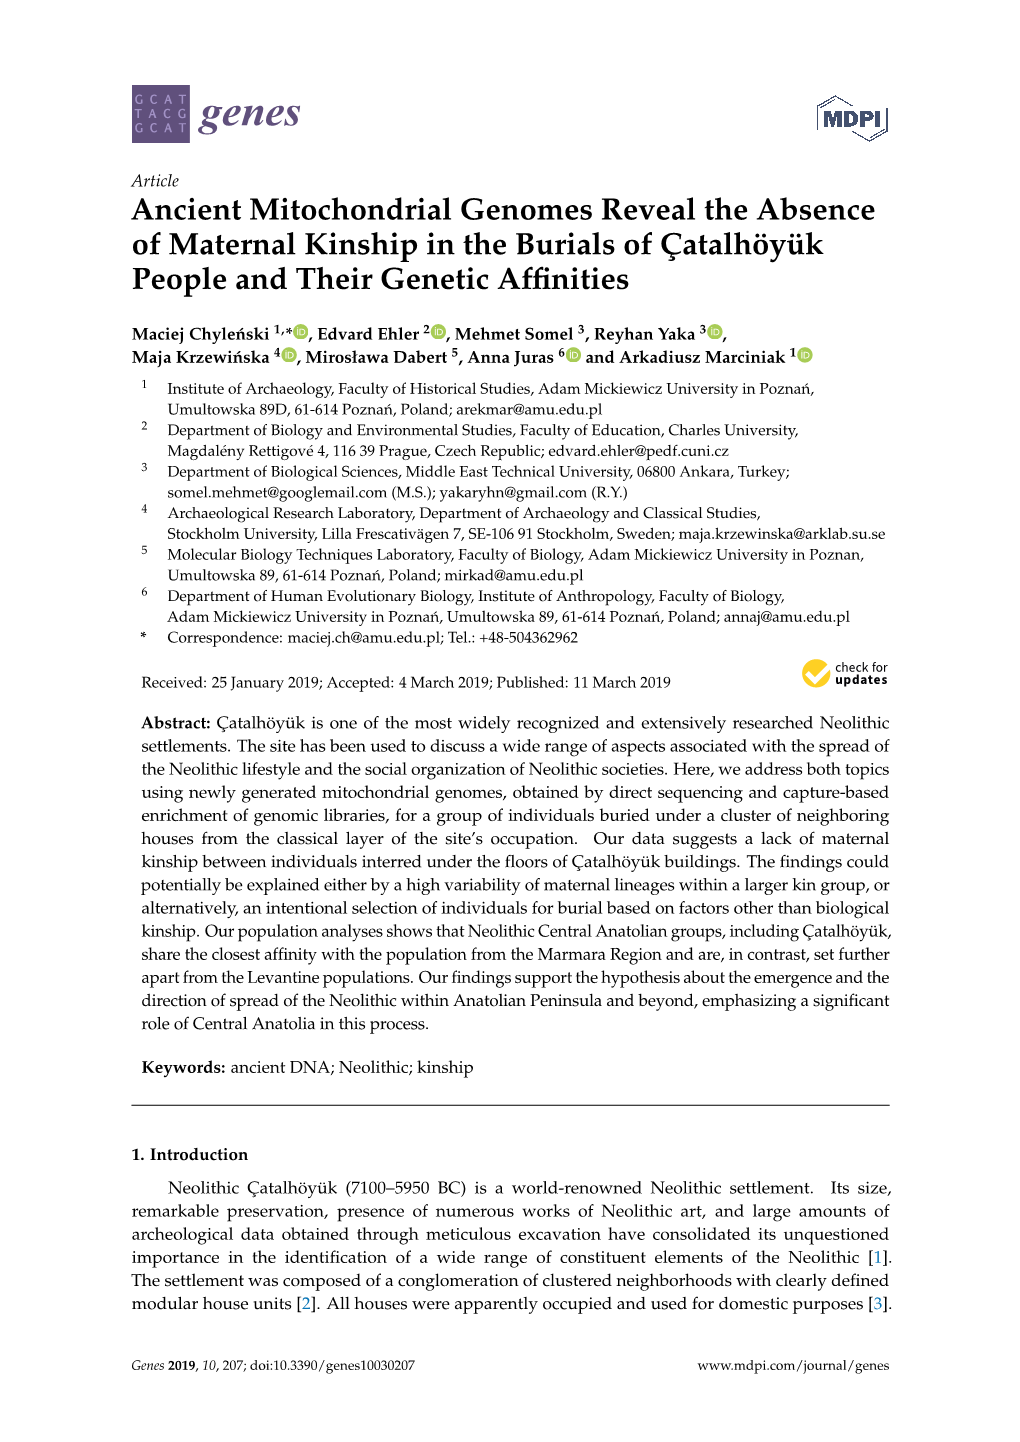 Ancient Mitochondrial Genomes Reveal the Absence of Maternal Kinship in the Burials of Çatalhöyük People and Their Genetic Afﬁnities